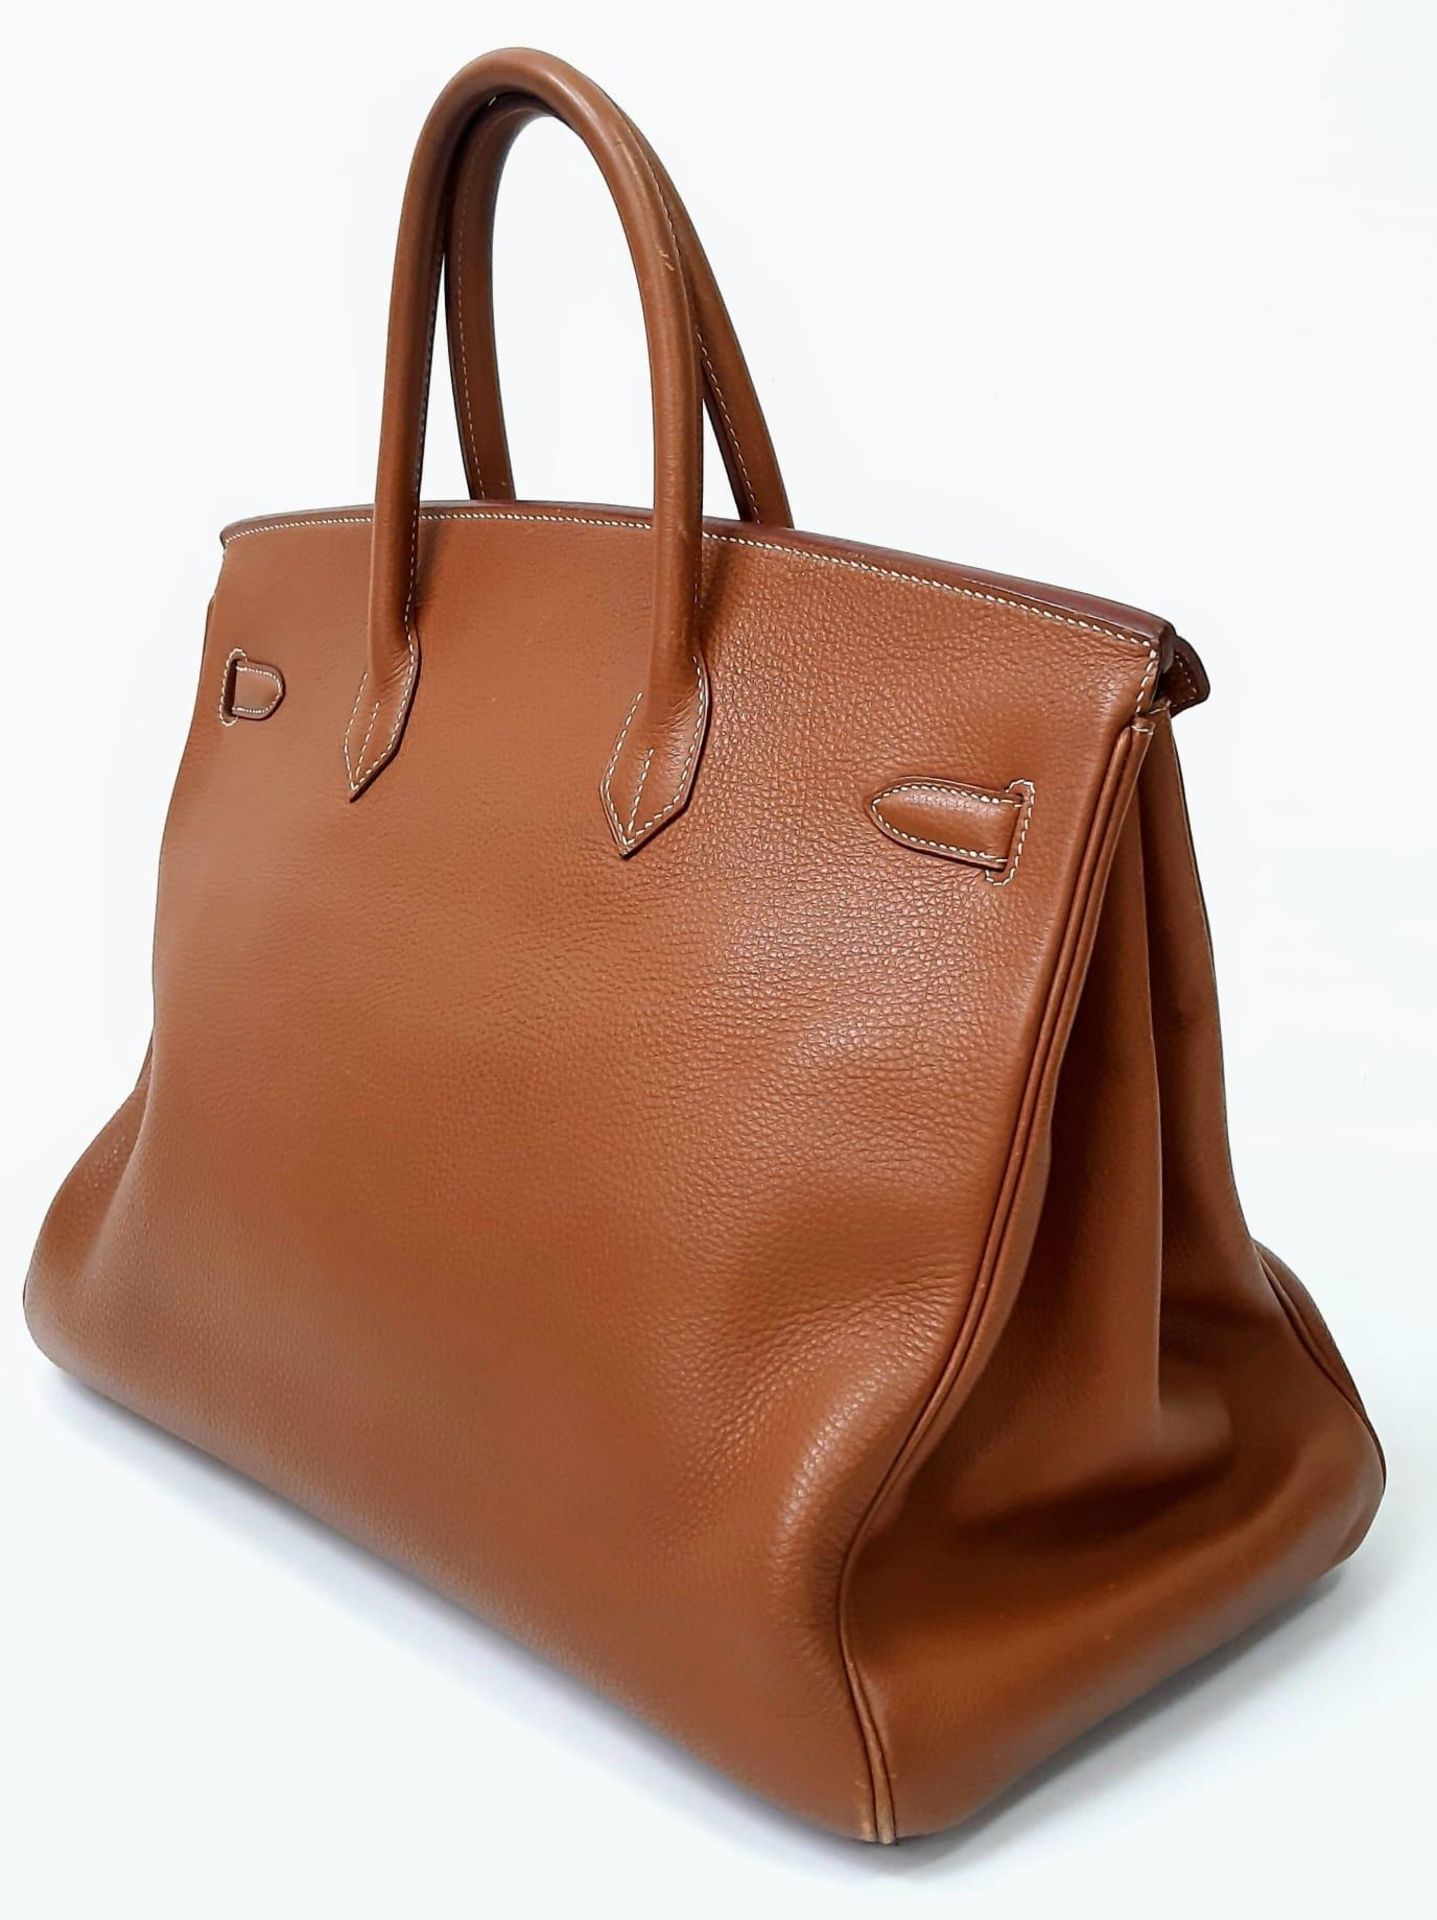 A Hermes Birkin Brown Leather Tote Bag. Handcrafted from the highest quality leather by skilled - Bild 4 aus 17